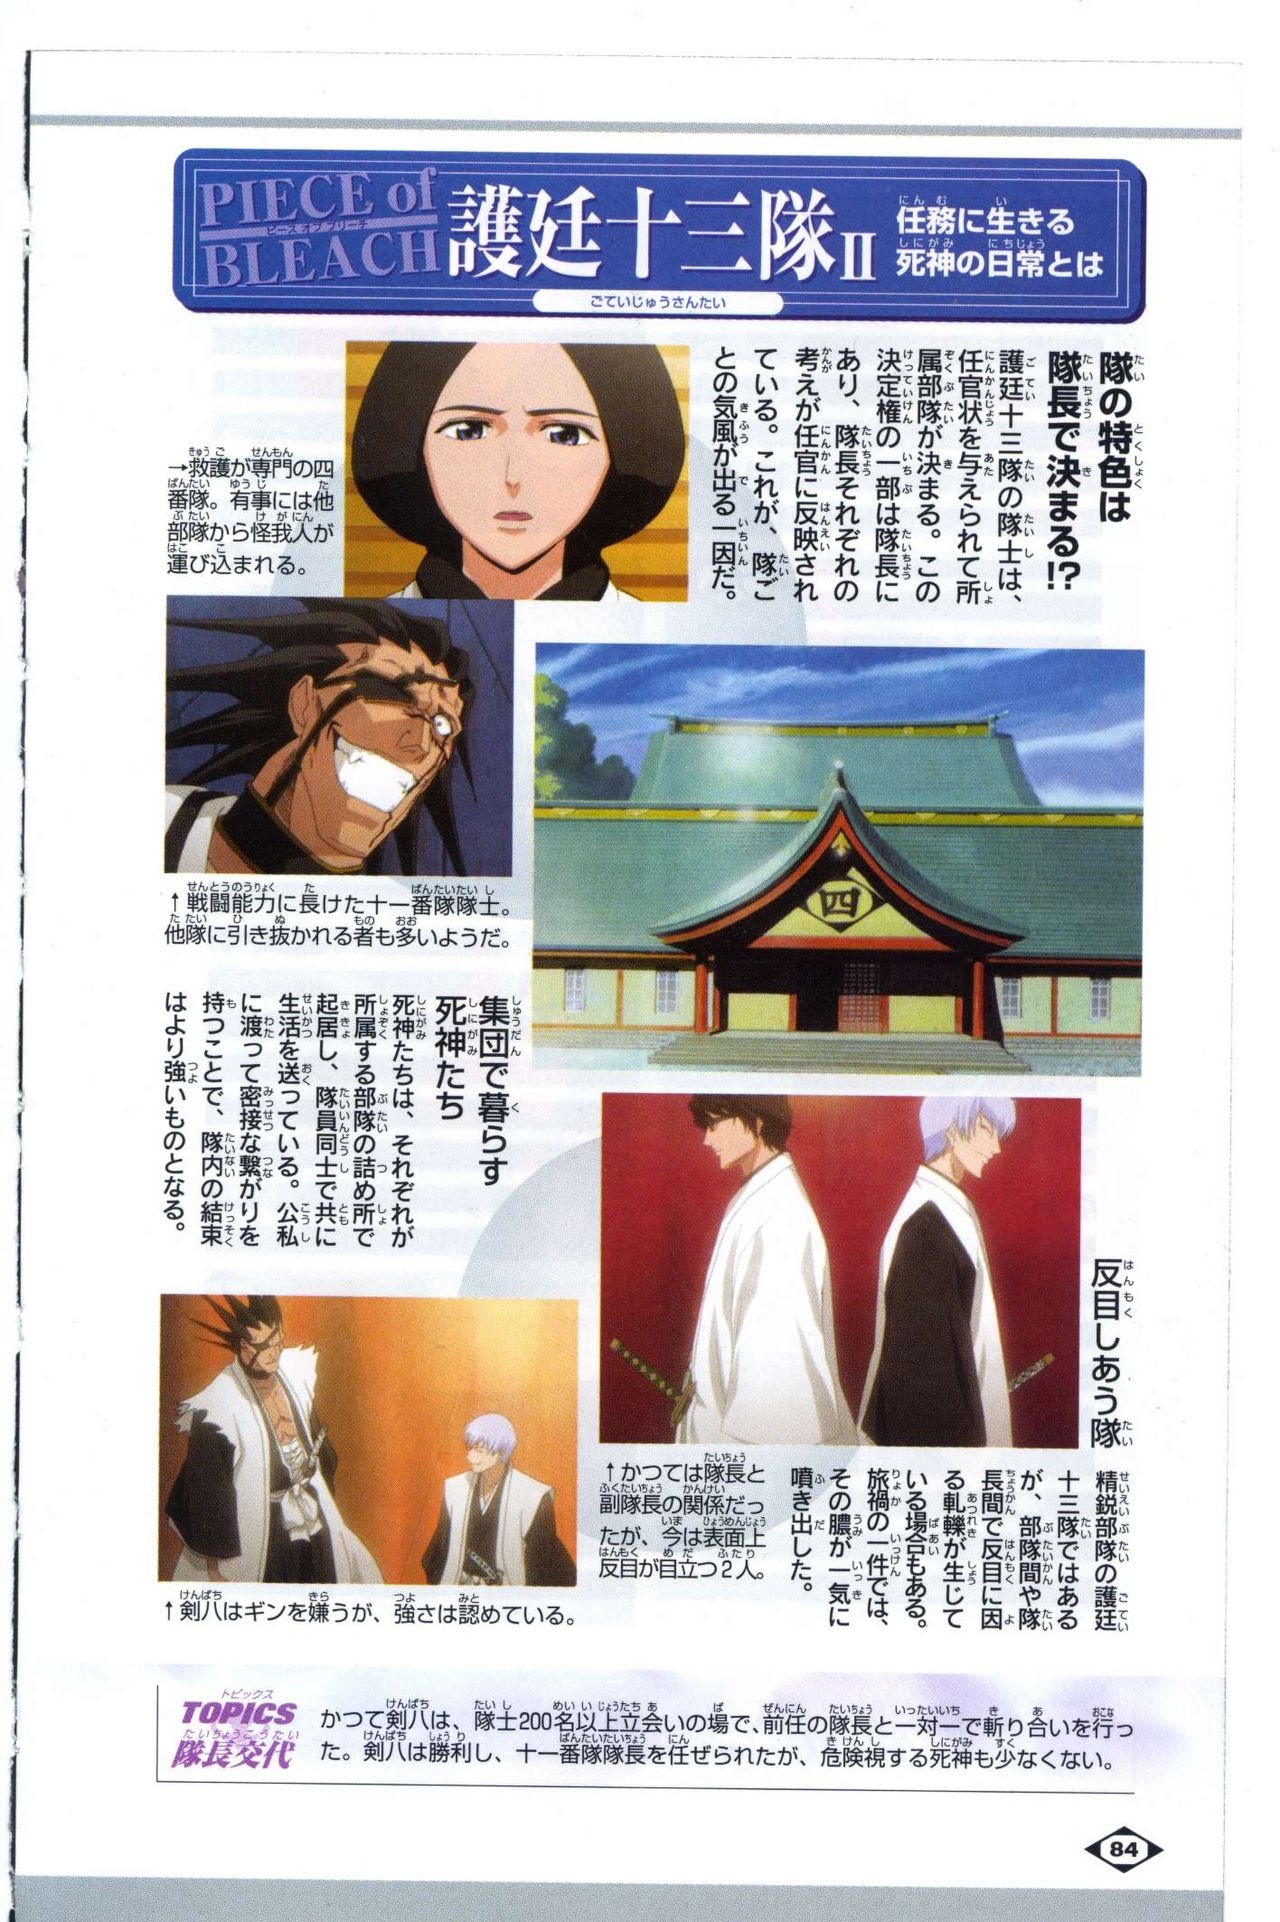 Bleach: Official Animation Book VIBEs 84